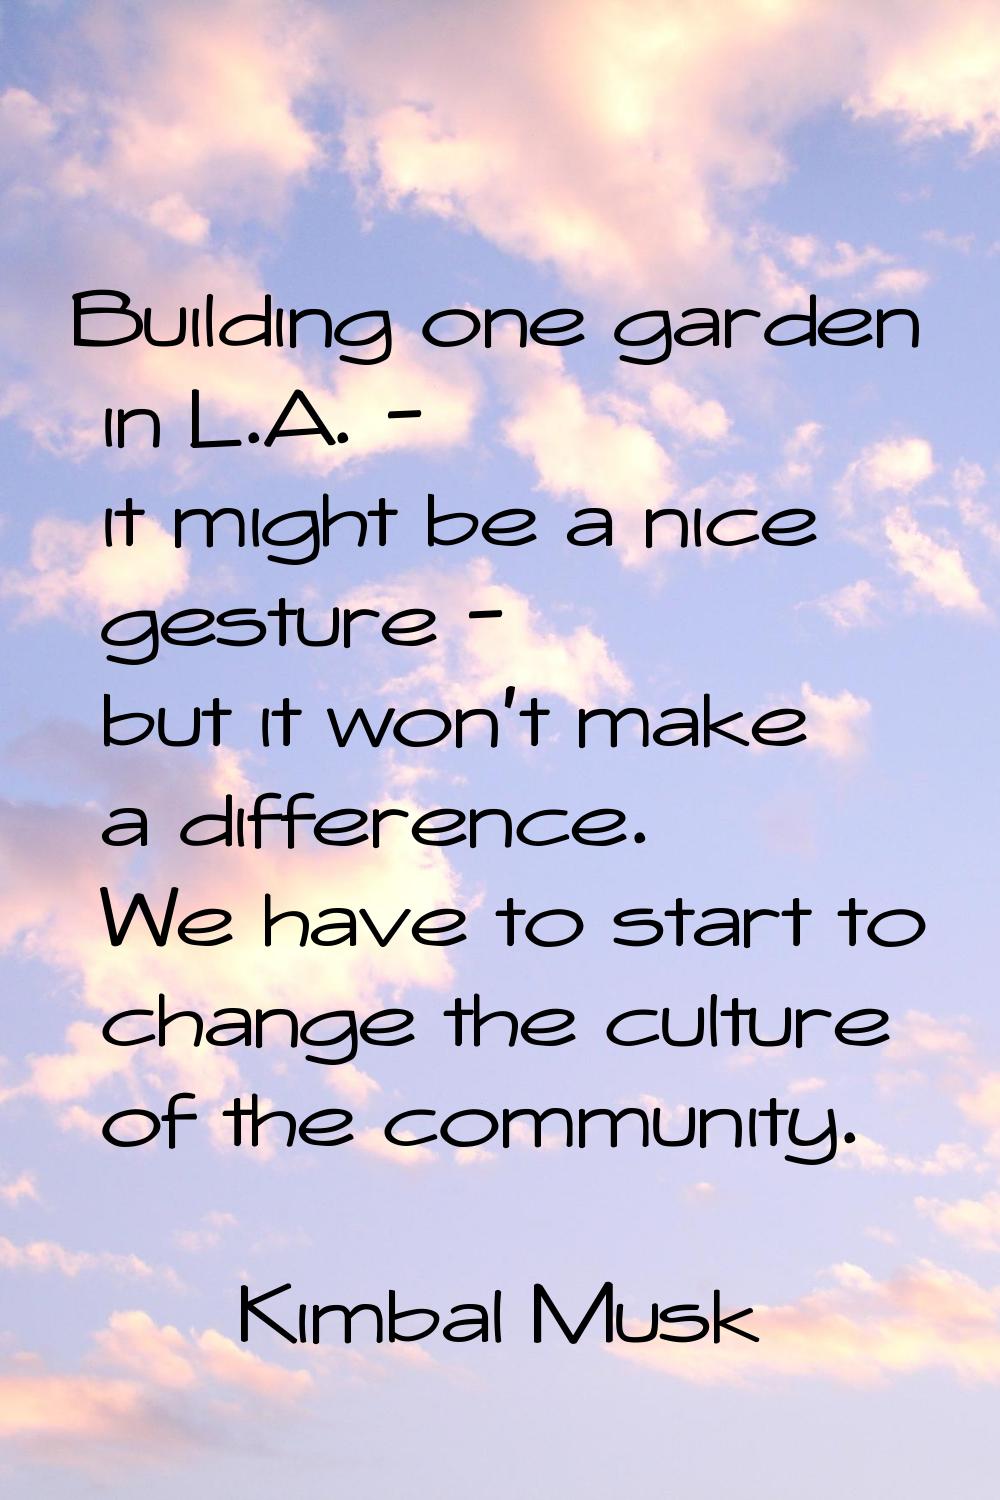 Building one garden in L.A. - it might be a nice gesture - but it won't make a difference. We have 